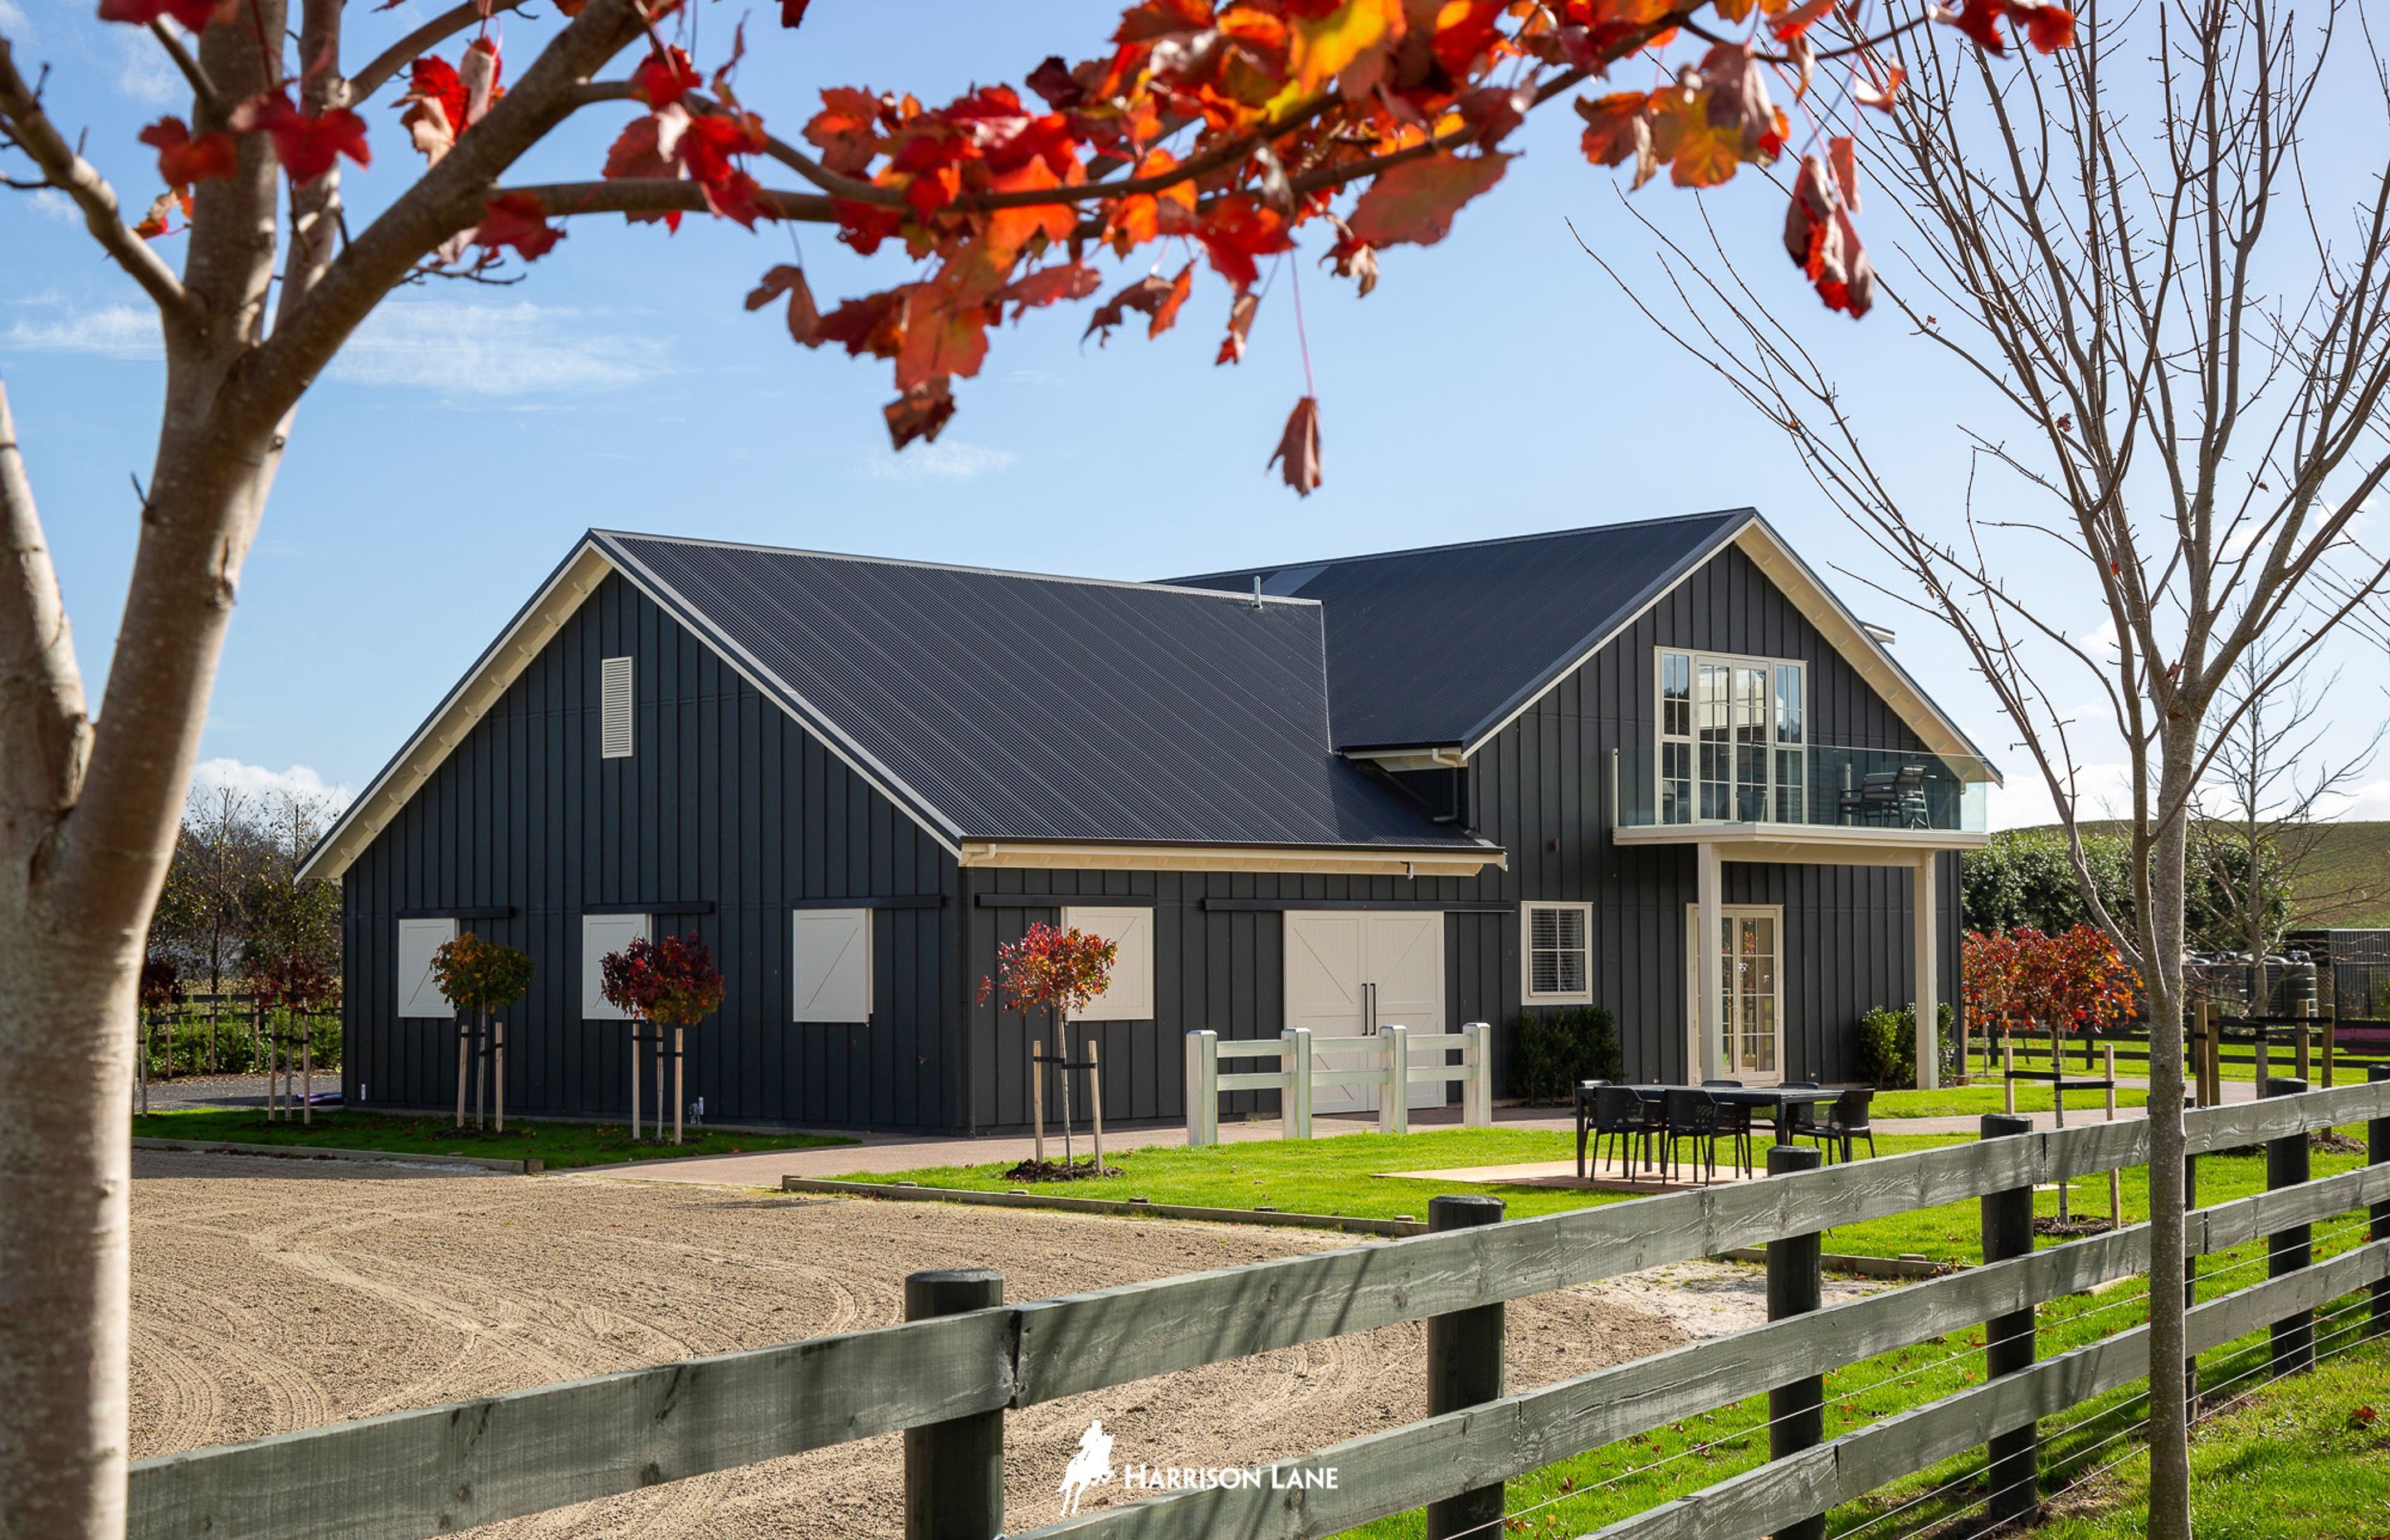 The barn is clad in charcoal grey-painted plywood and batten, with white details providing contrast.